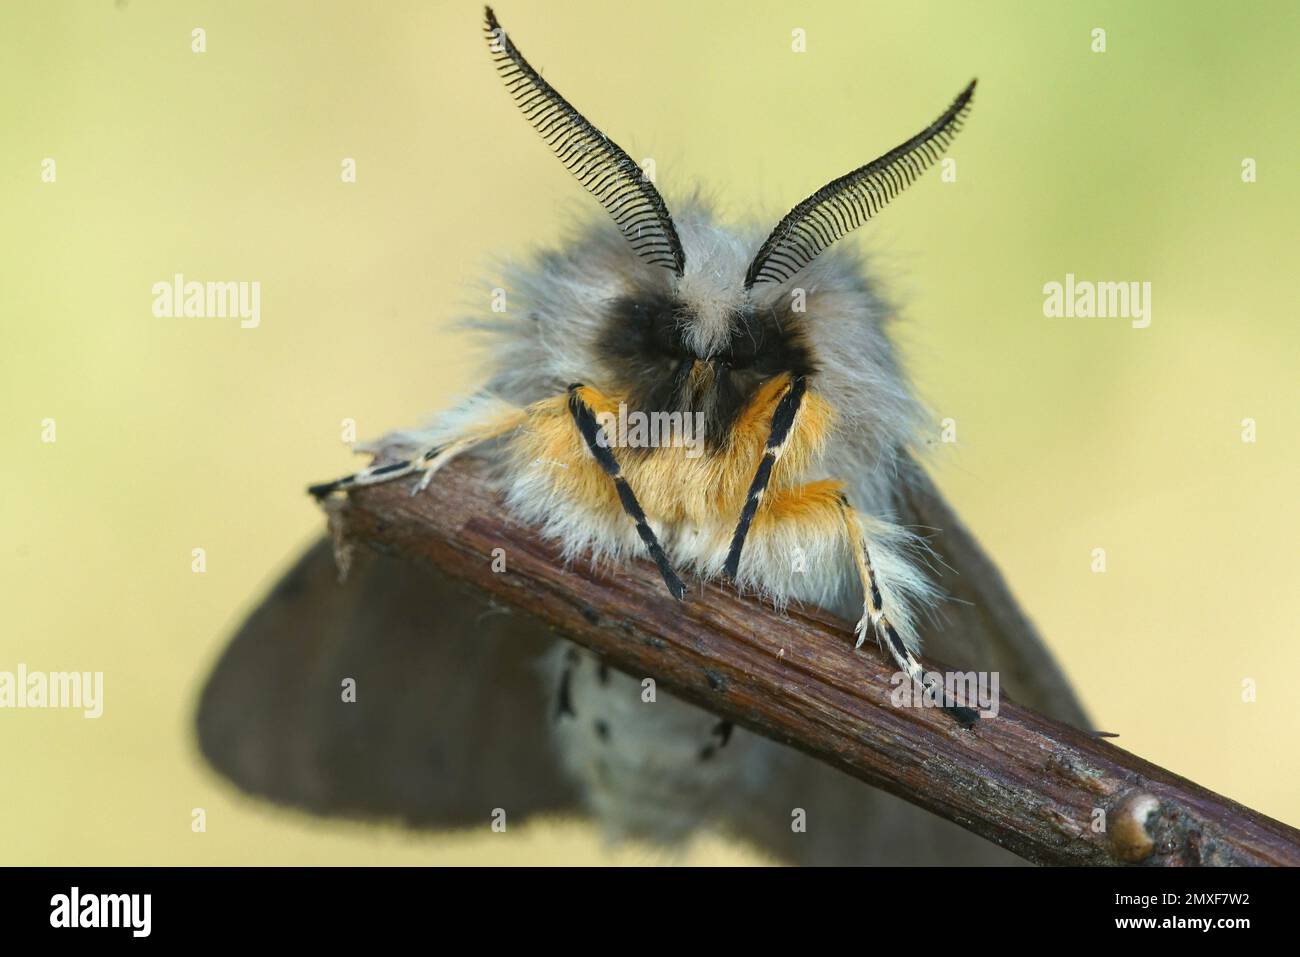 Detailed close-up macro image of hairy head and face of Diaphora mendica moth Muslin moth hanging on a twig Stock Photo